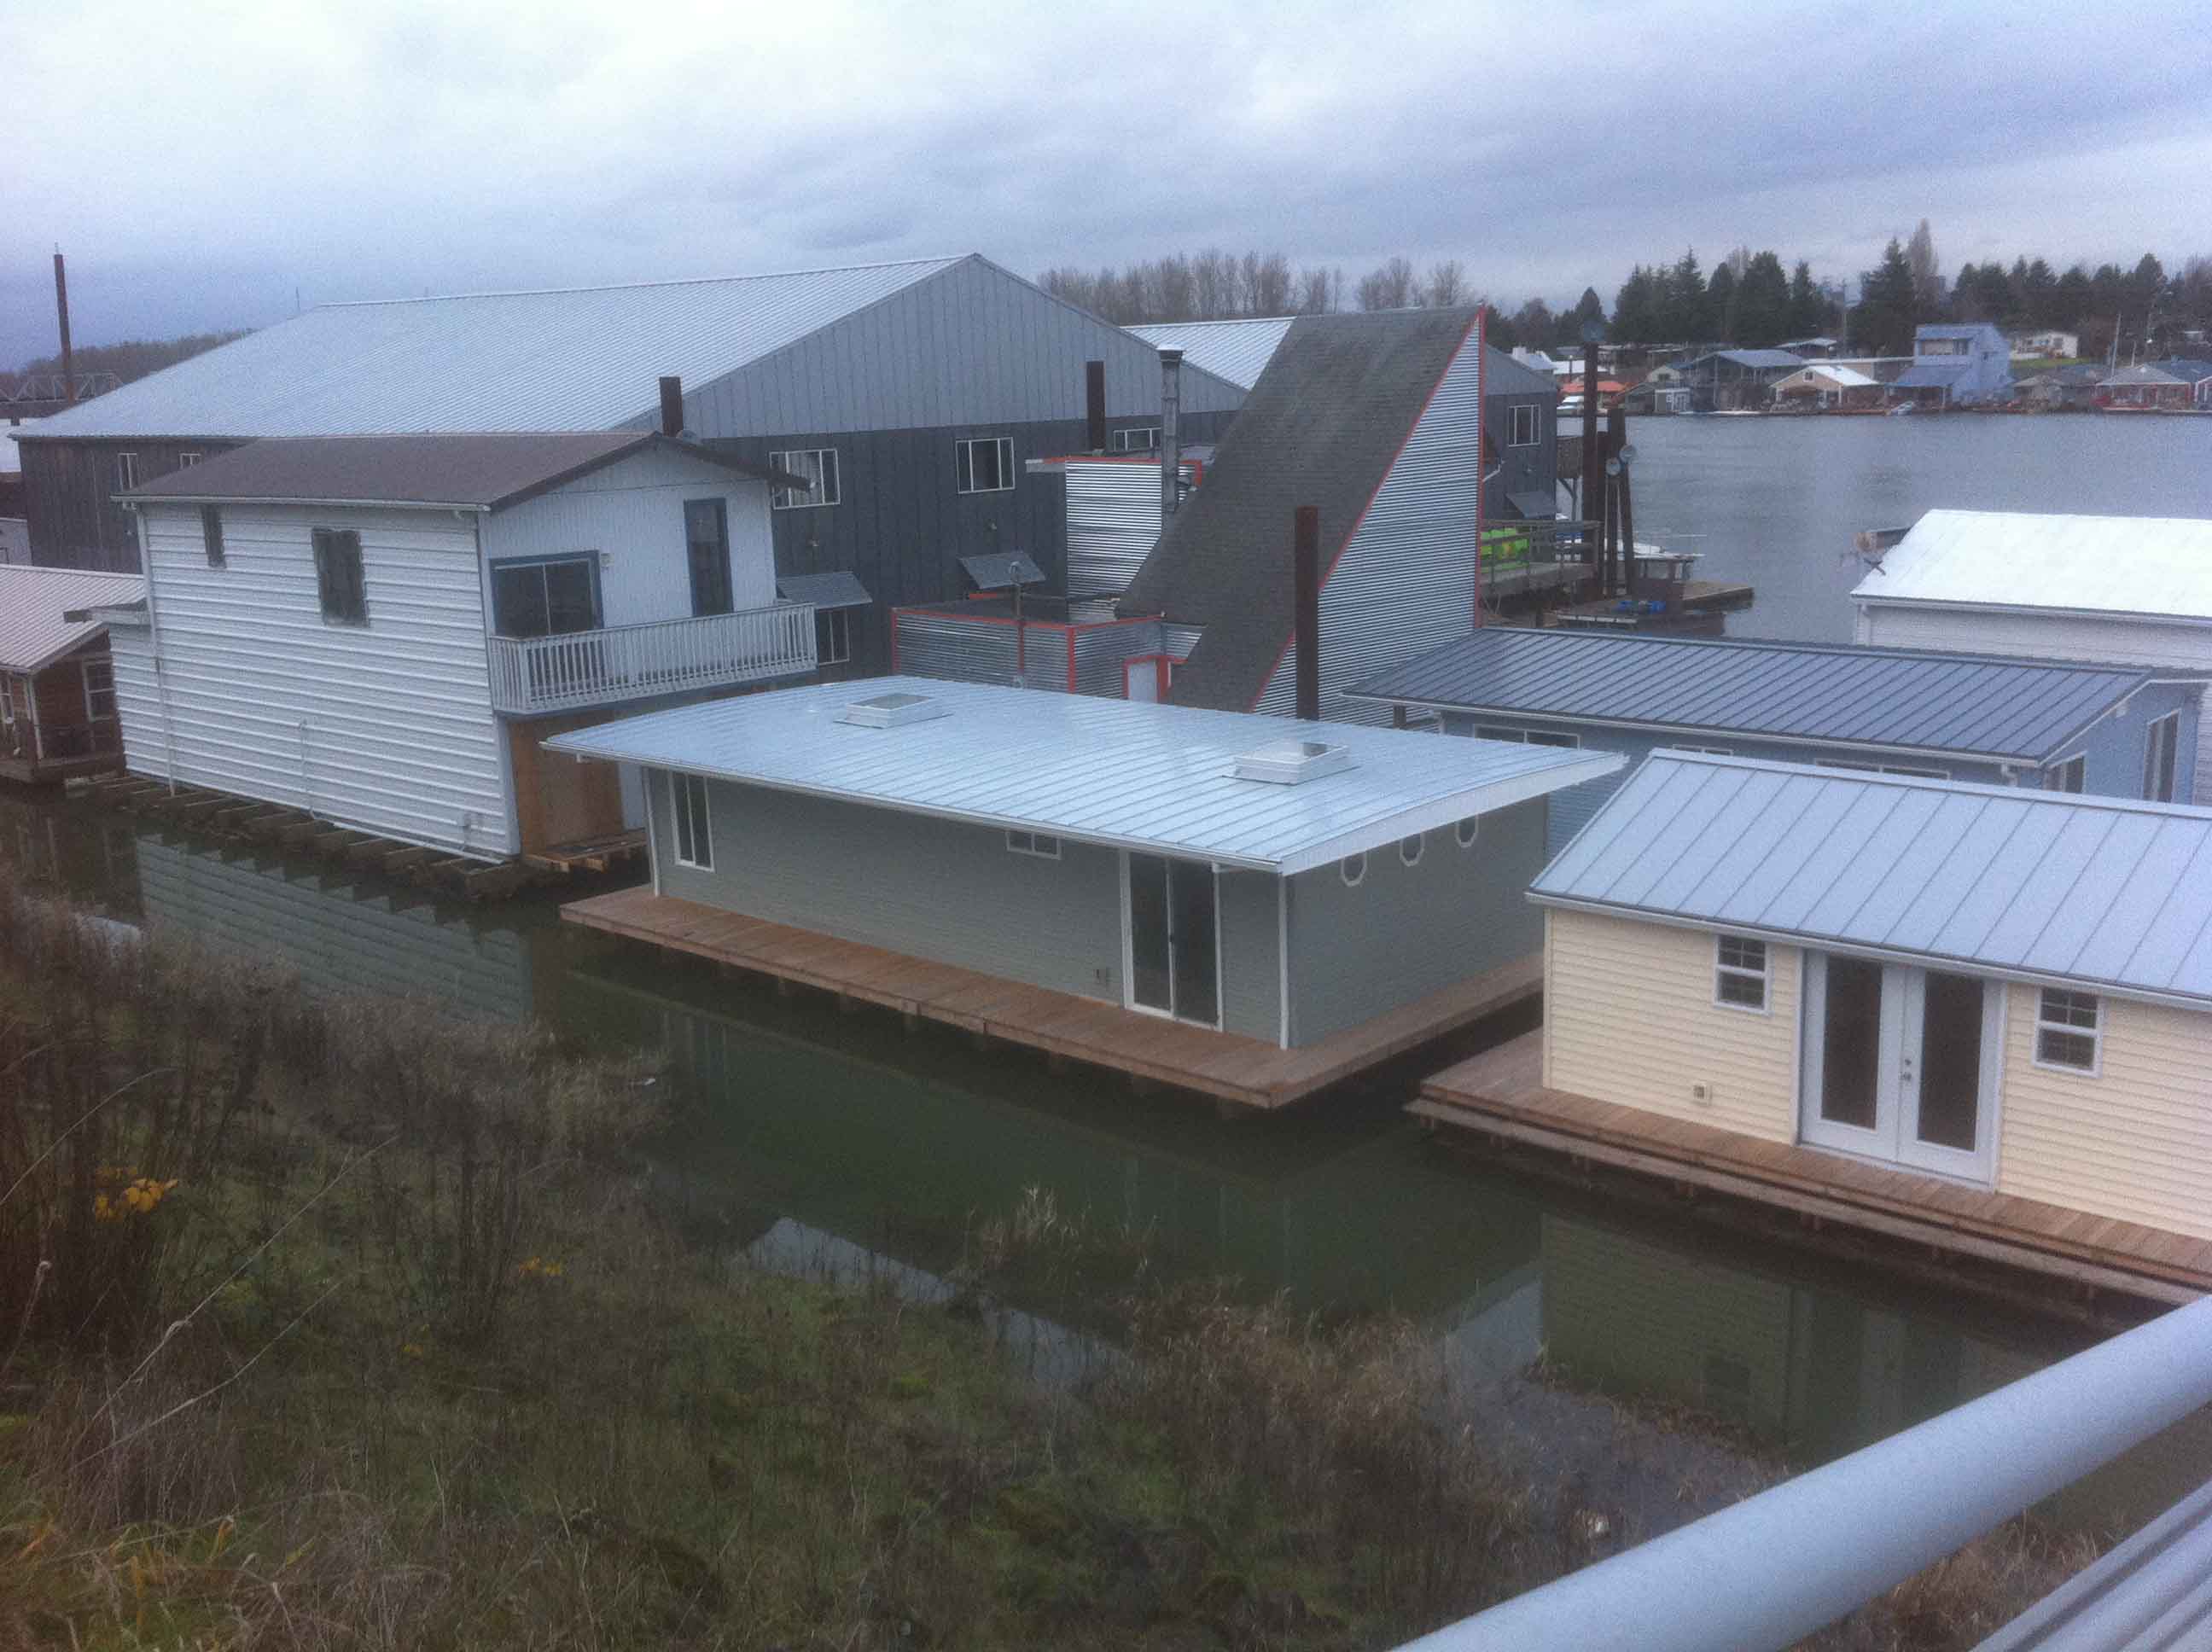 New boat house roofs